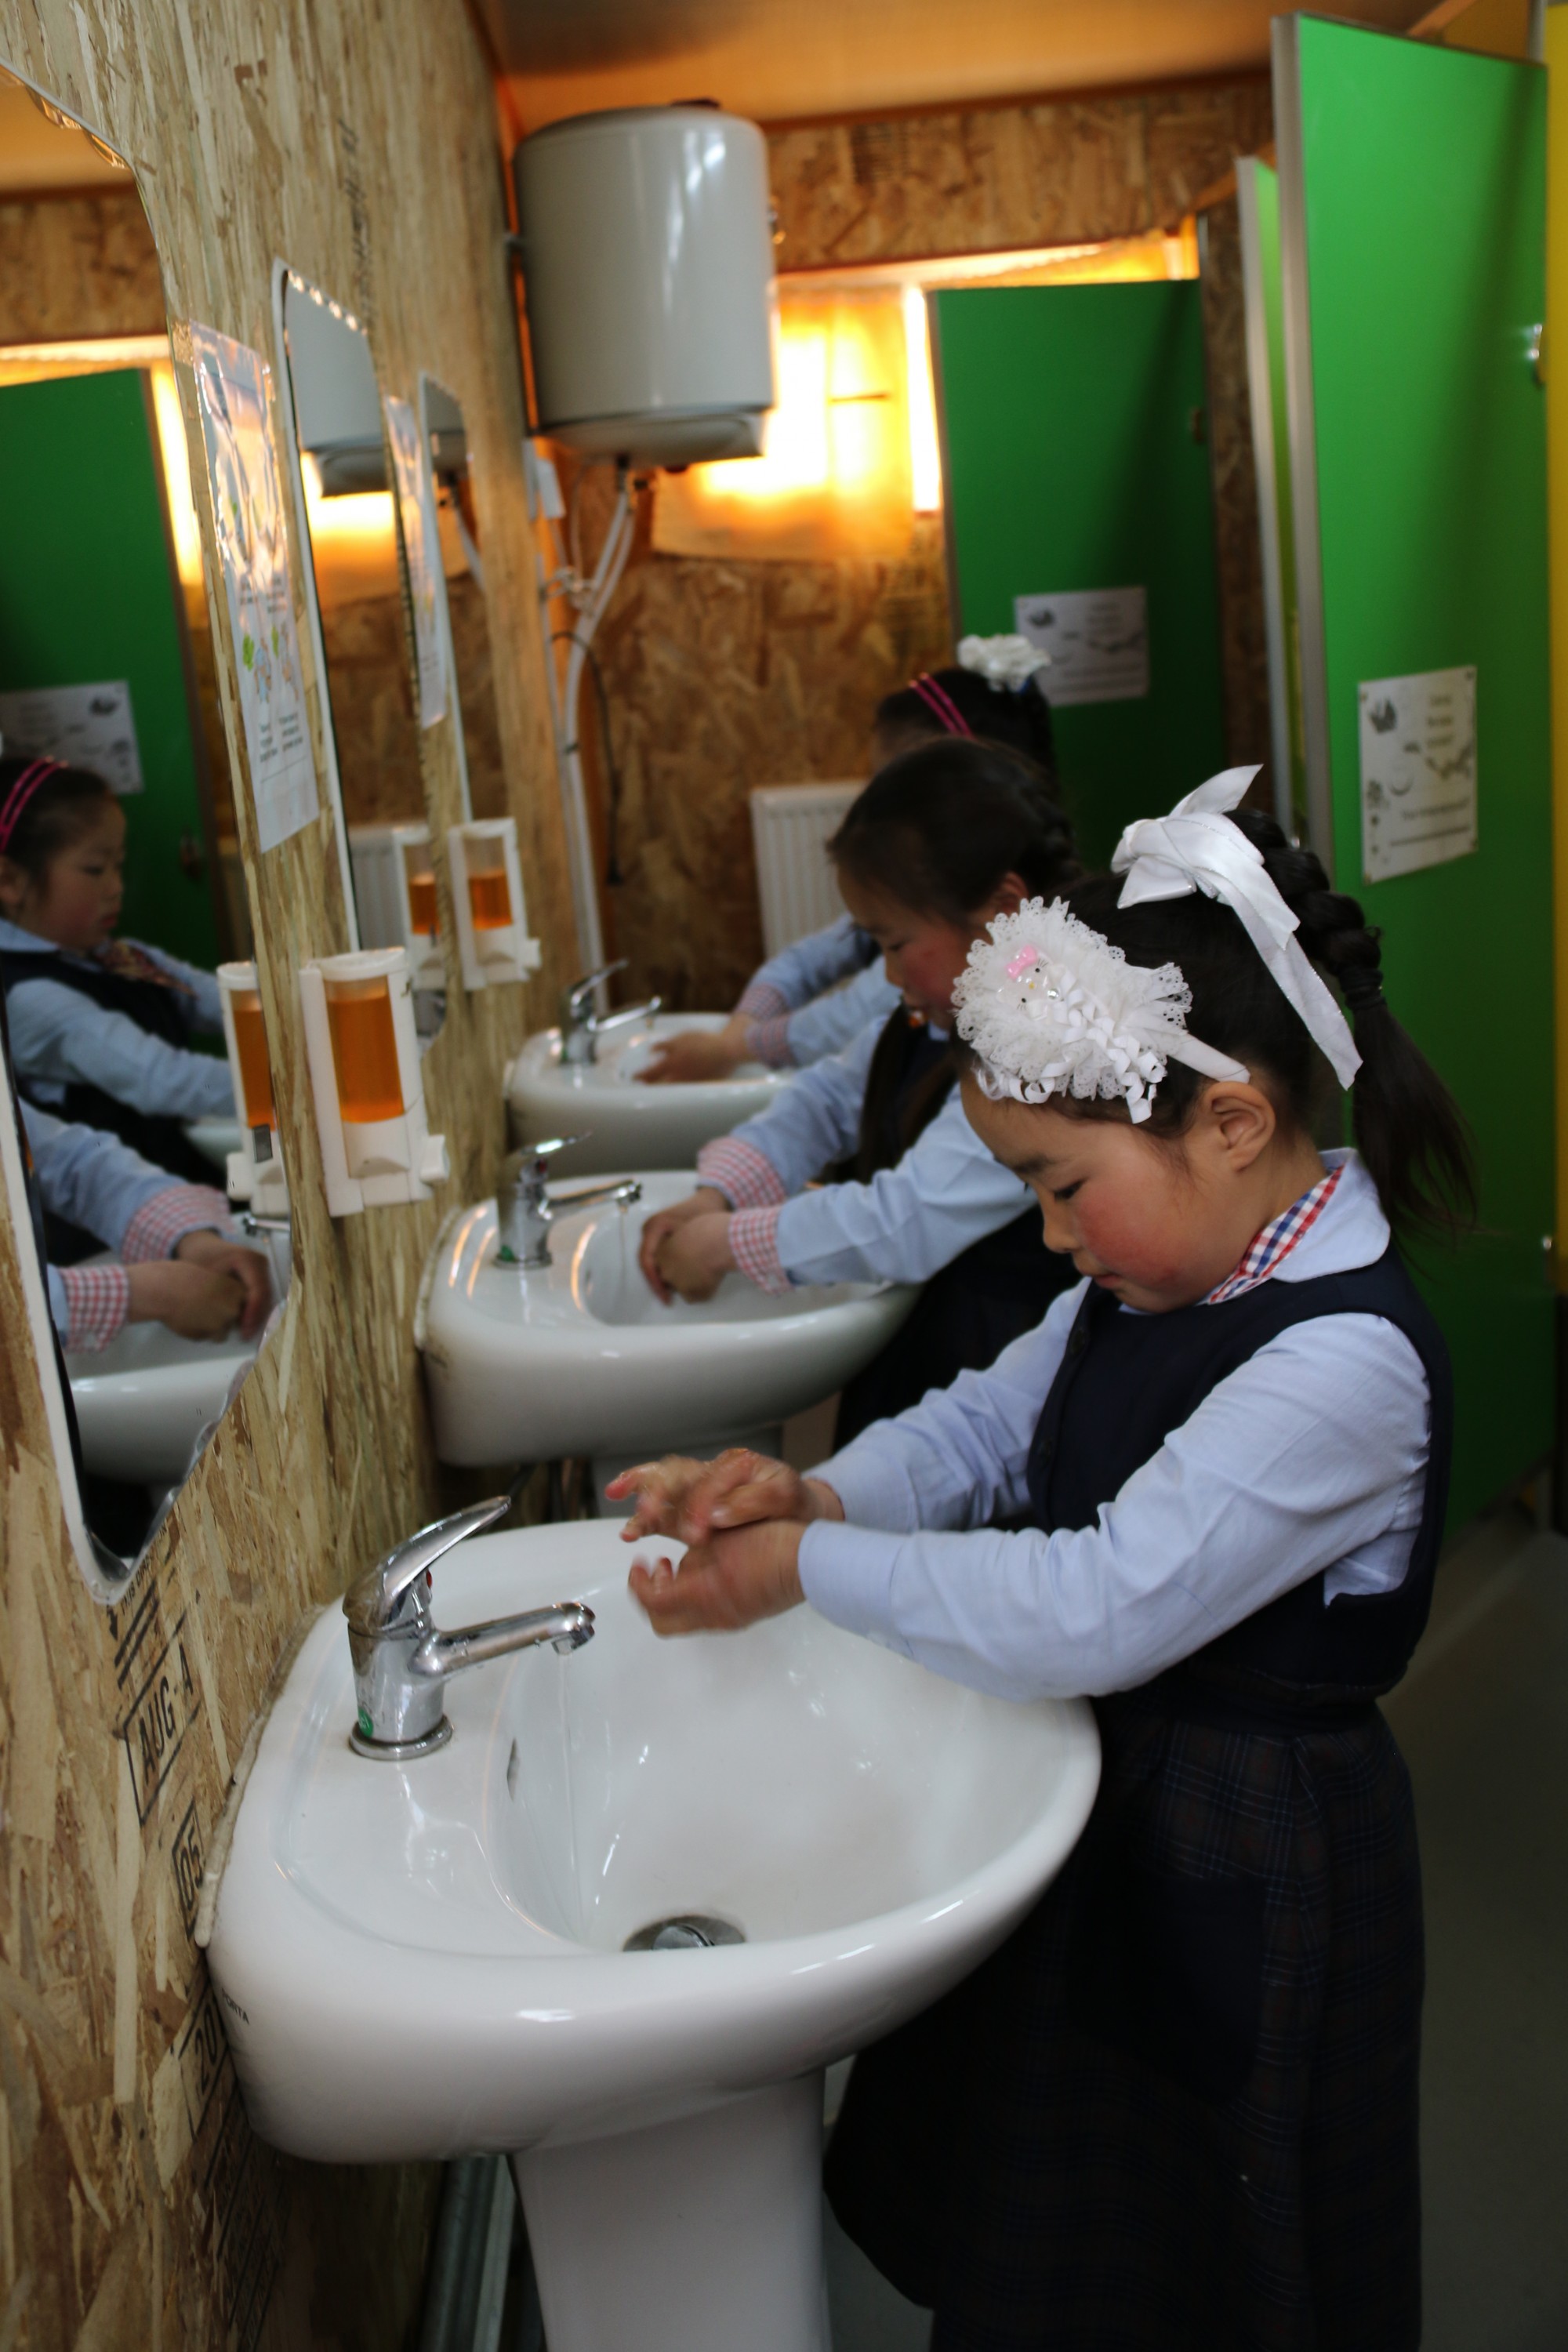 School children are washing their hands in UNICEF built WASH ccontainer house in Khuvsgul province, Mongolia